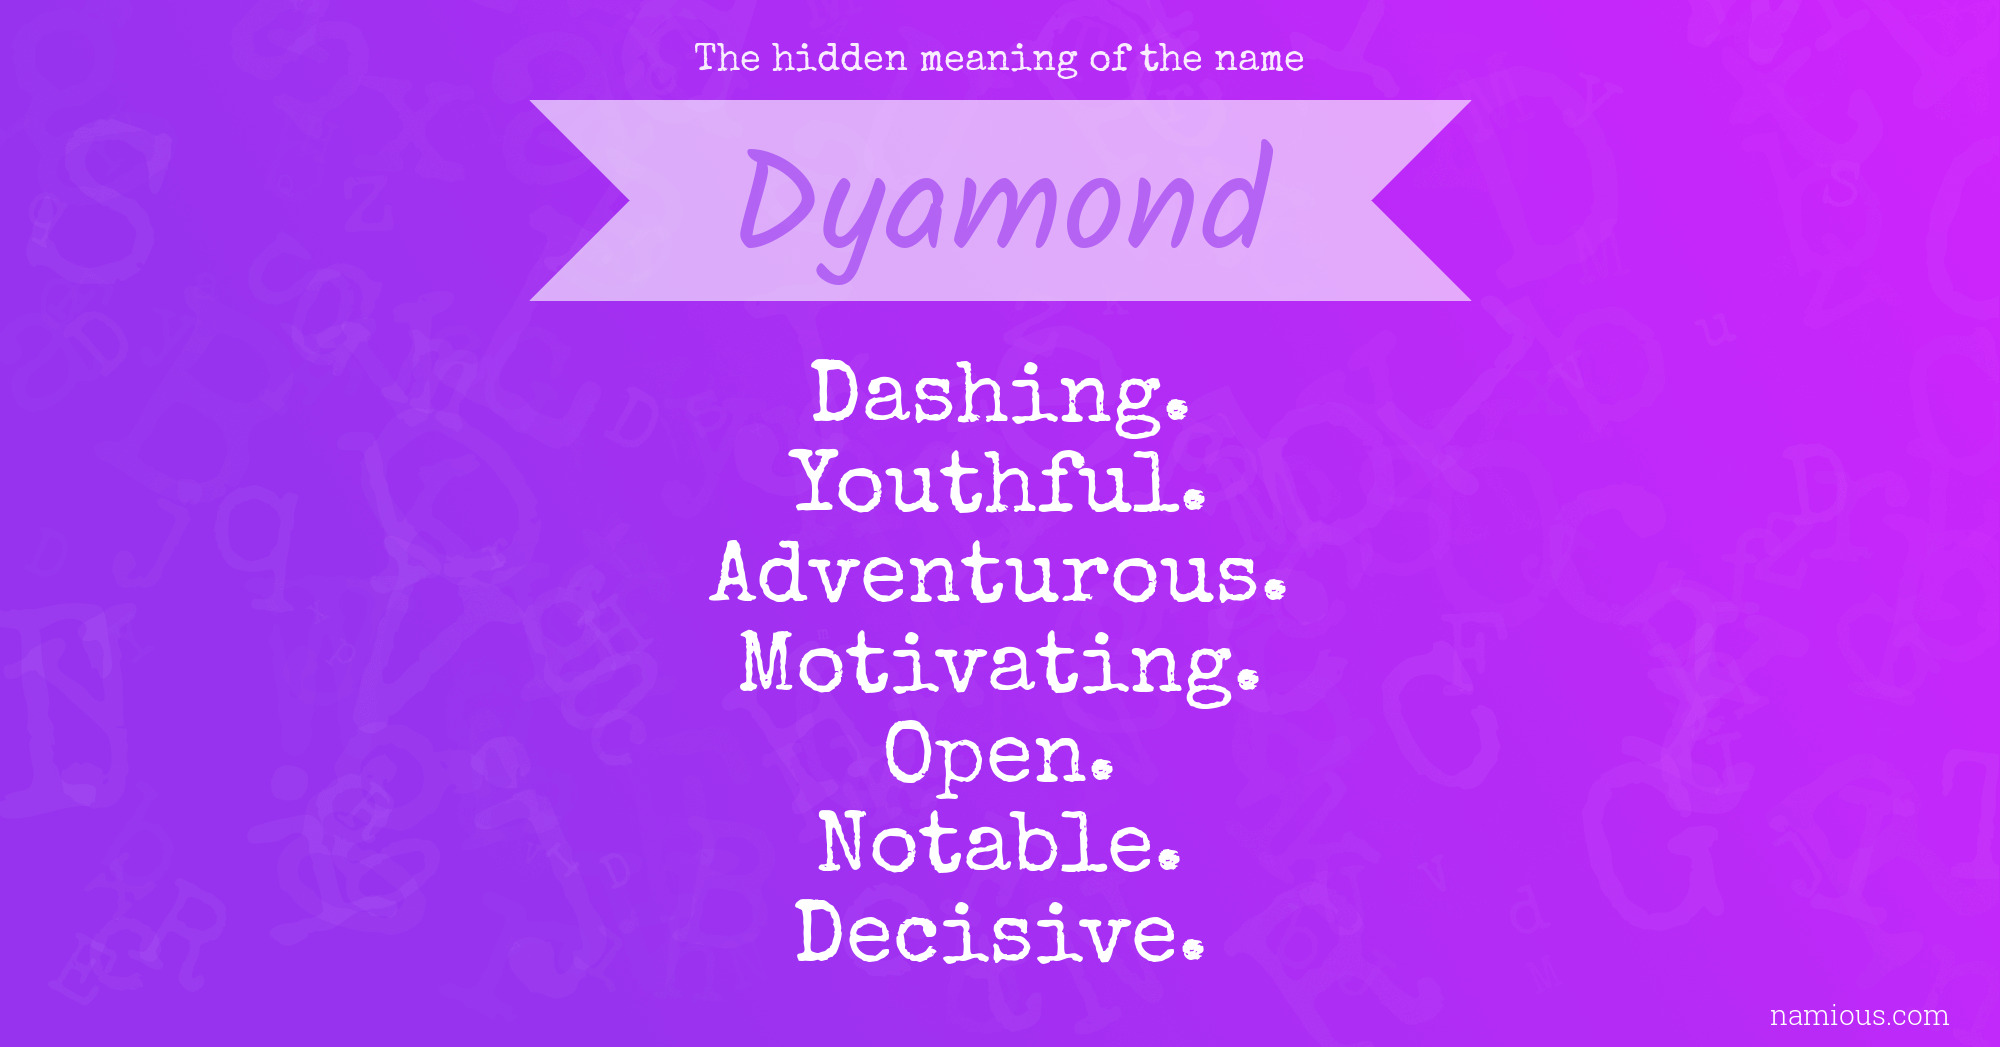 The hidden meaning of the name Dyamond